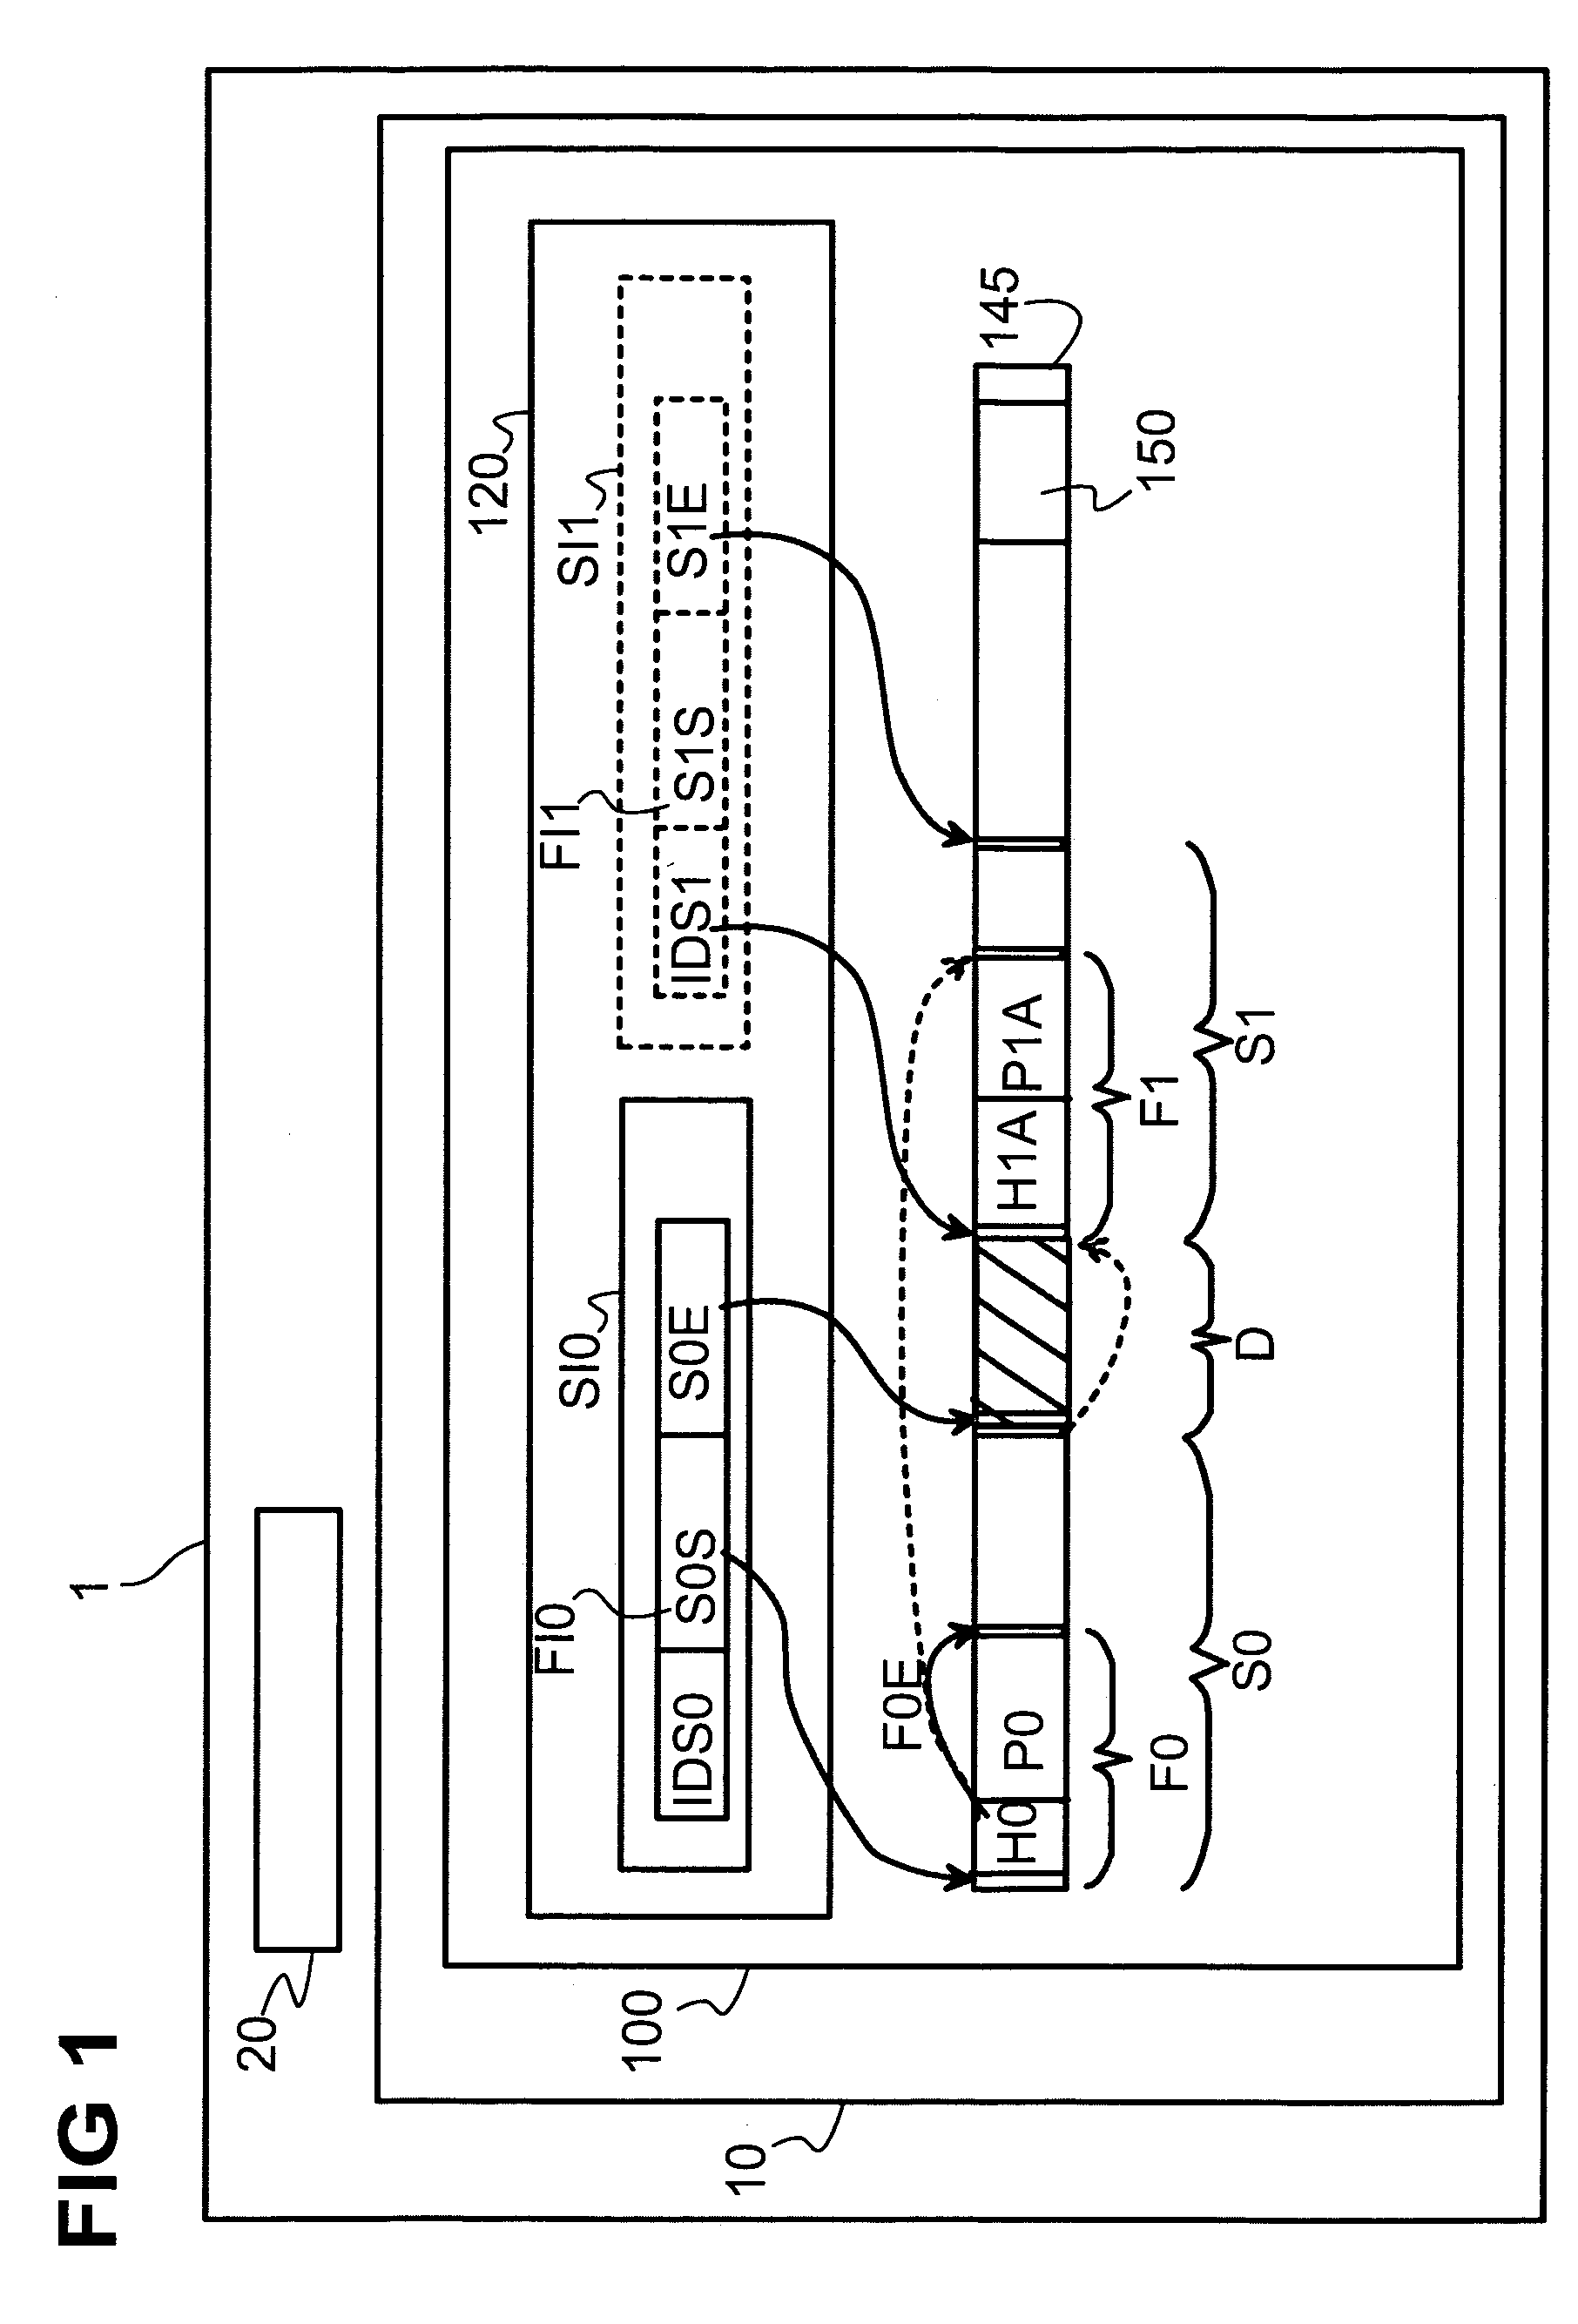 Method of storing and organizing files on a storage medium via a file system